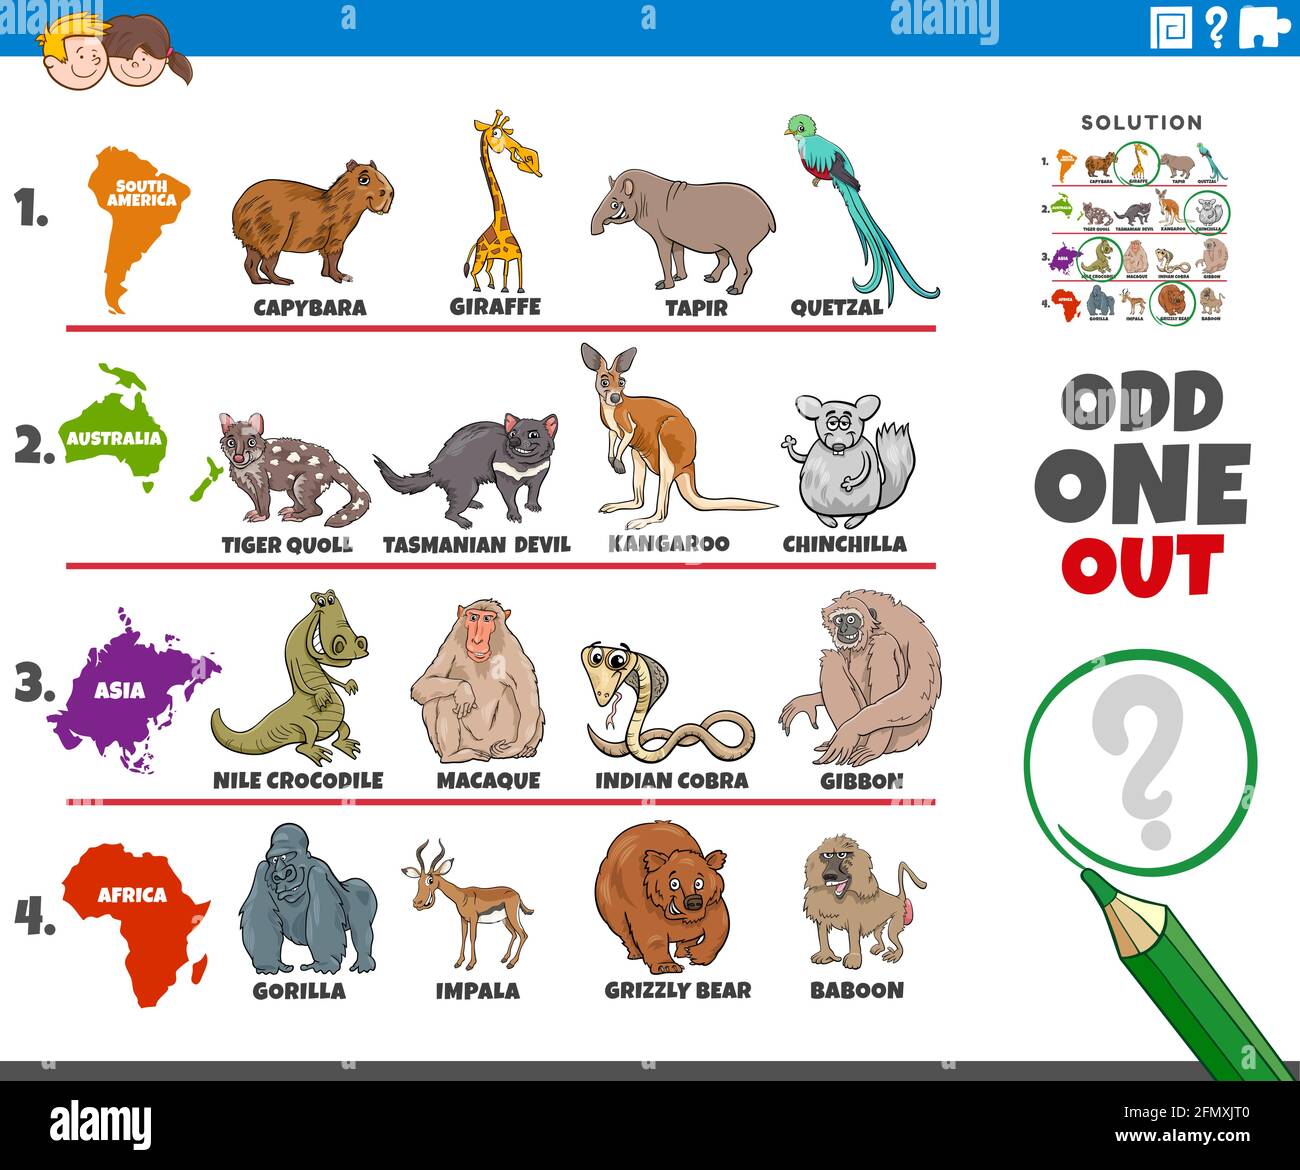 Cartoon illustration of odd one out picture in a row educational game for elementary age or preschool children with animals species from different con Stock Vector